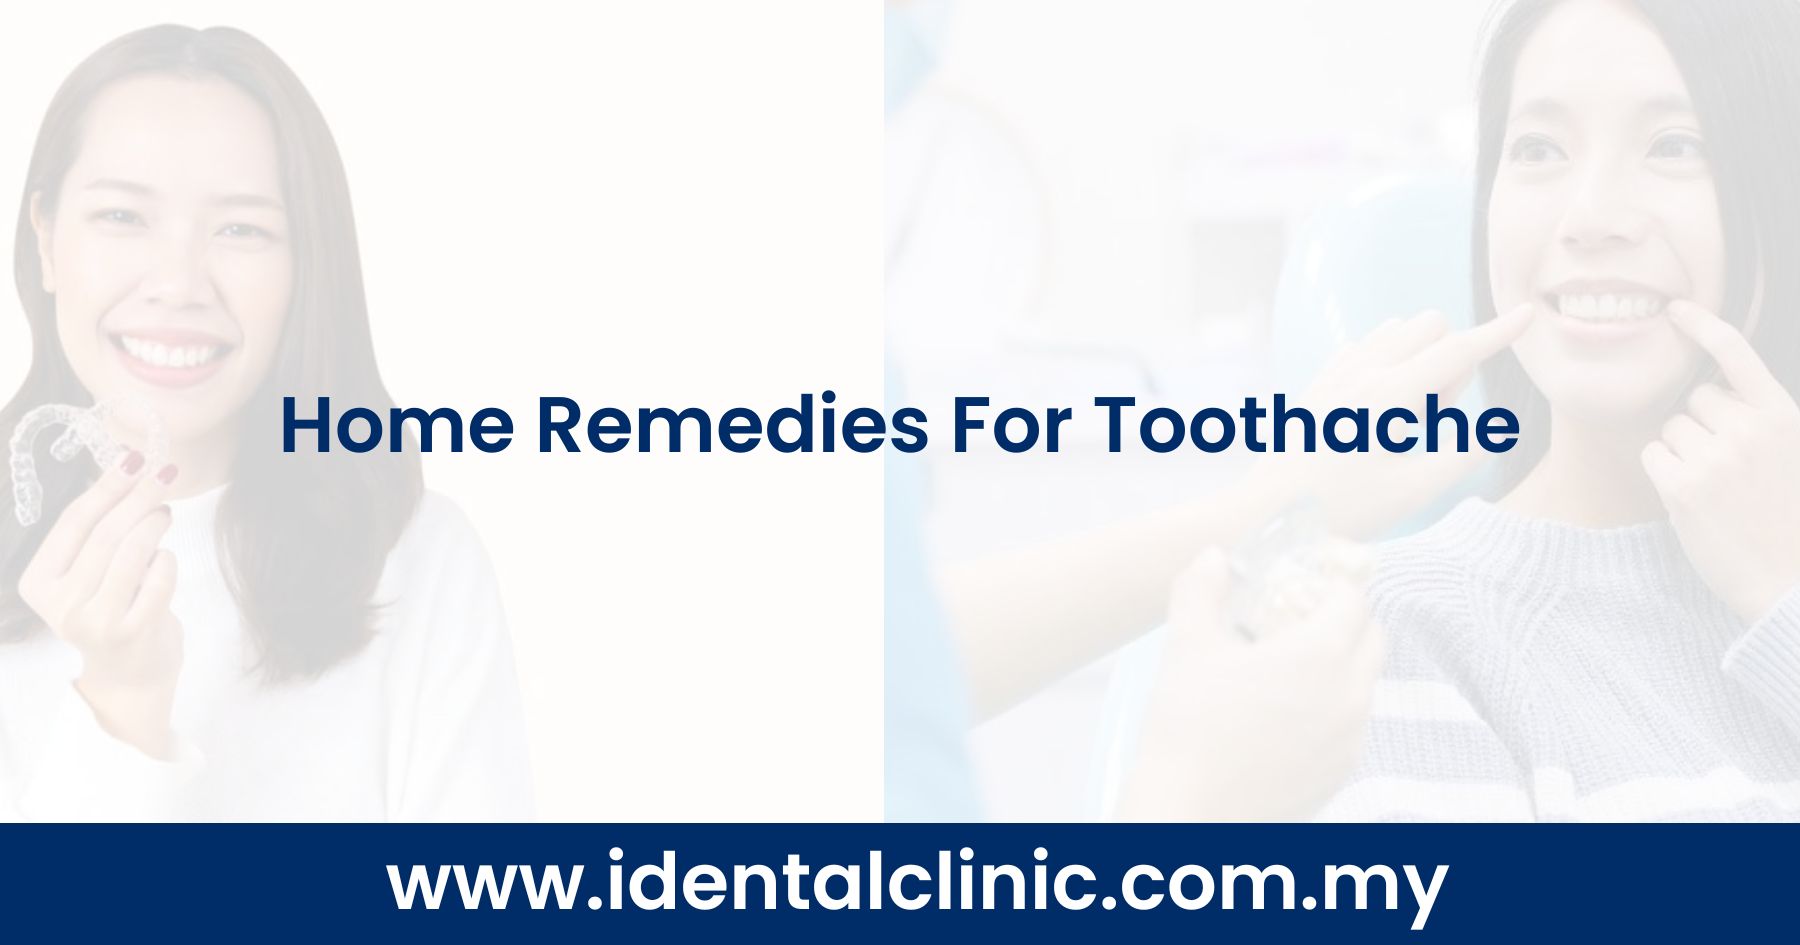 Home Remedies For Toothache